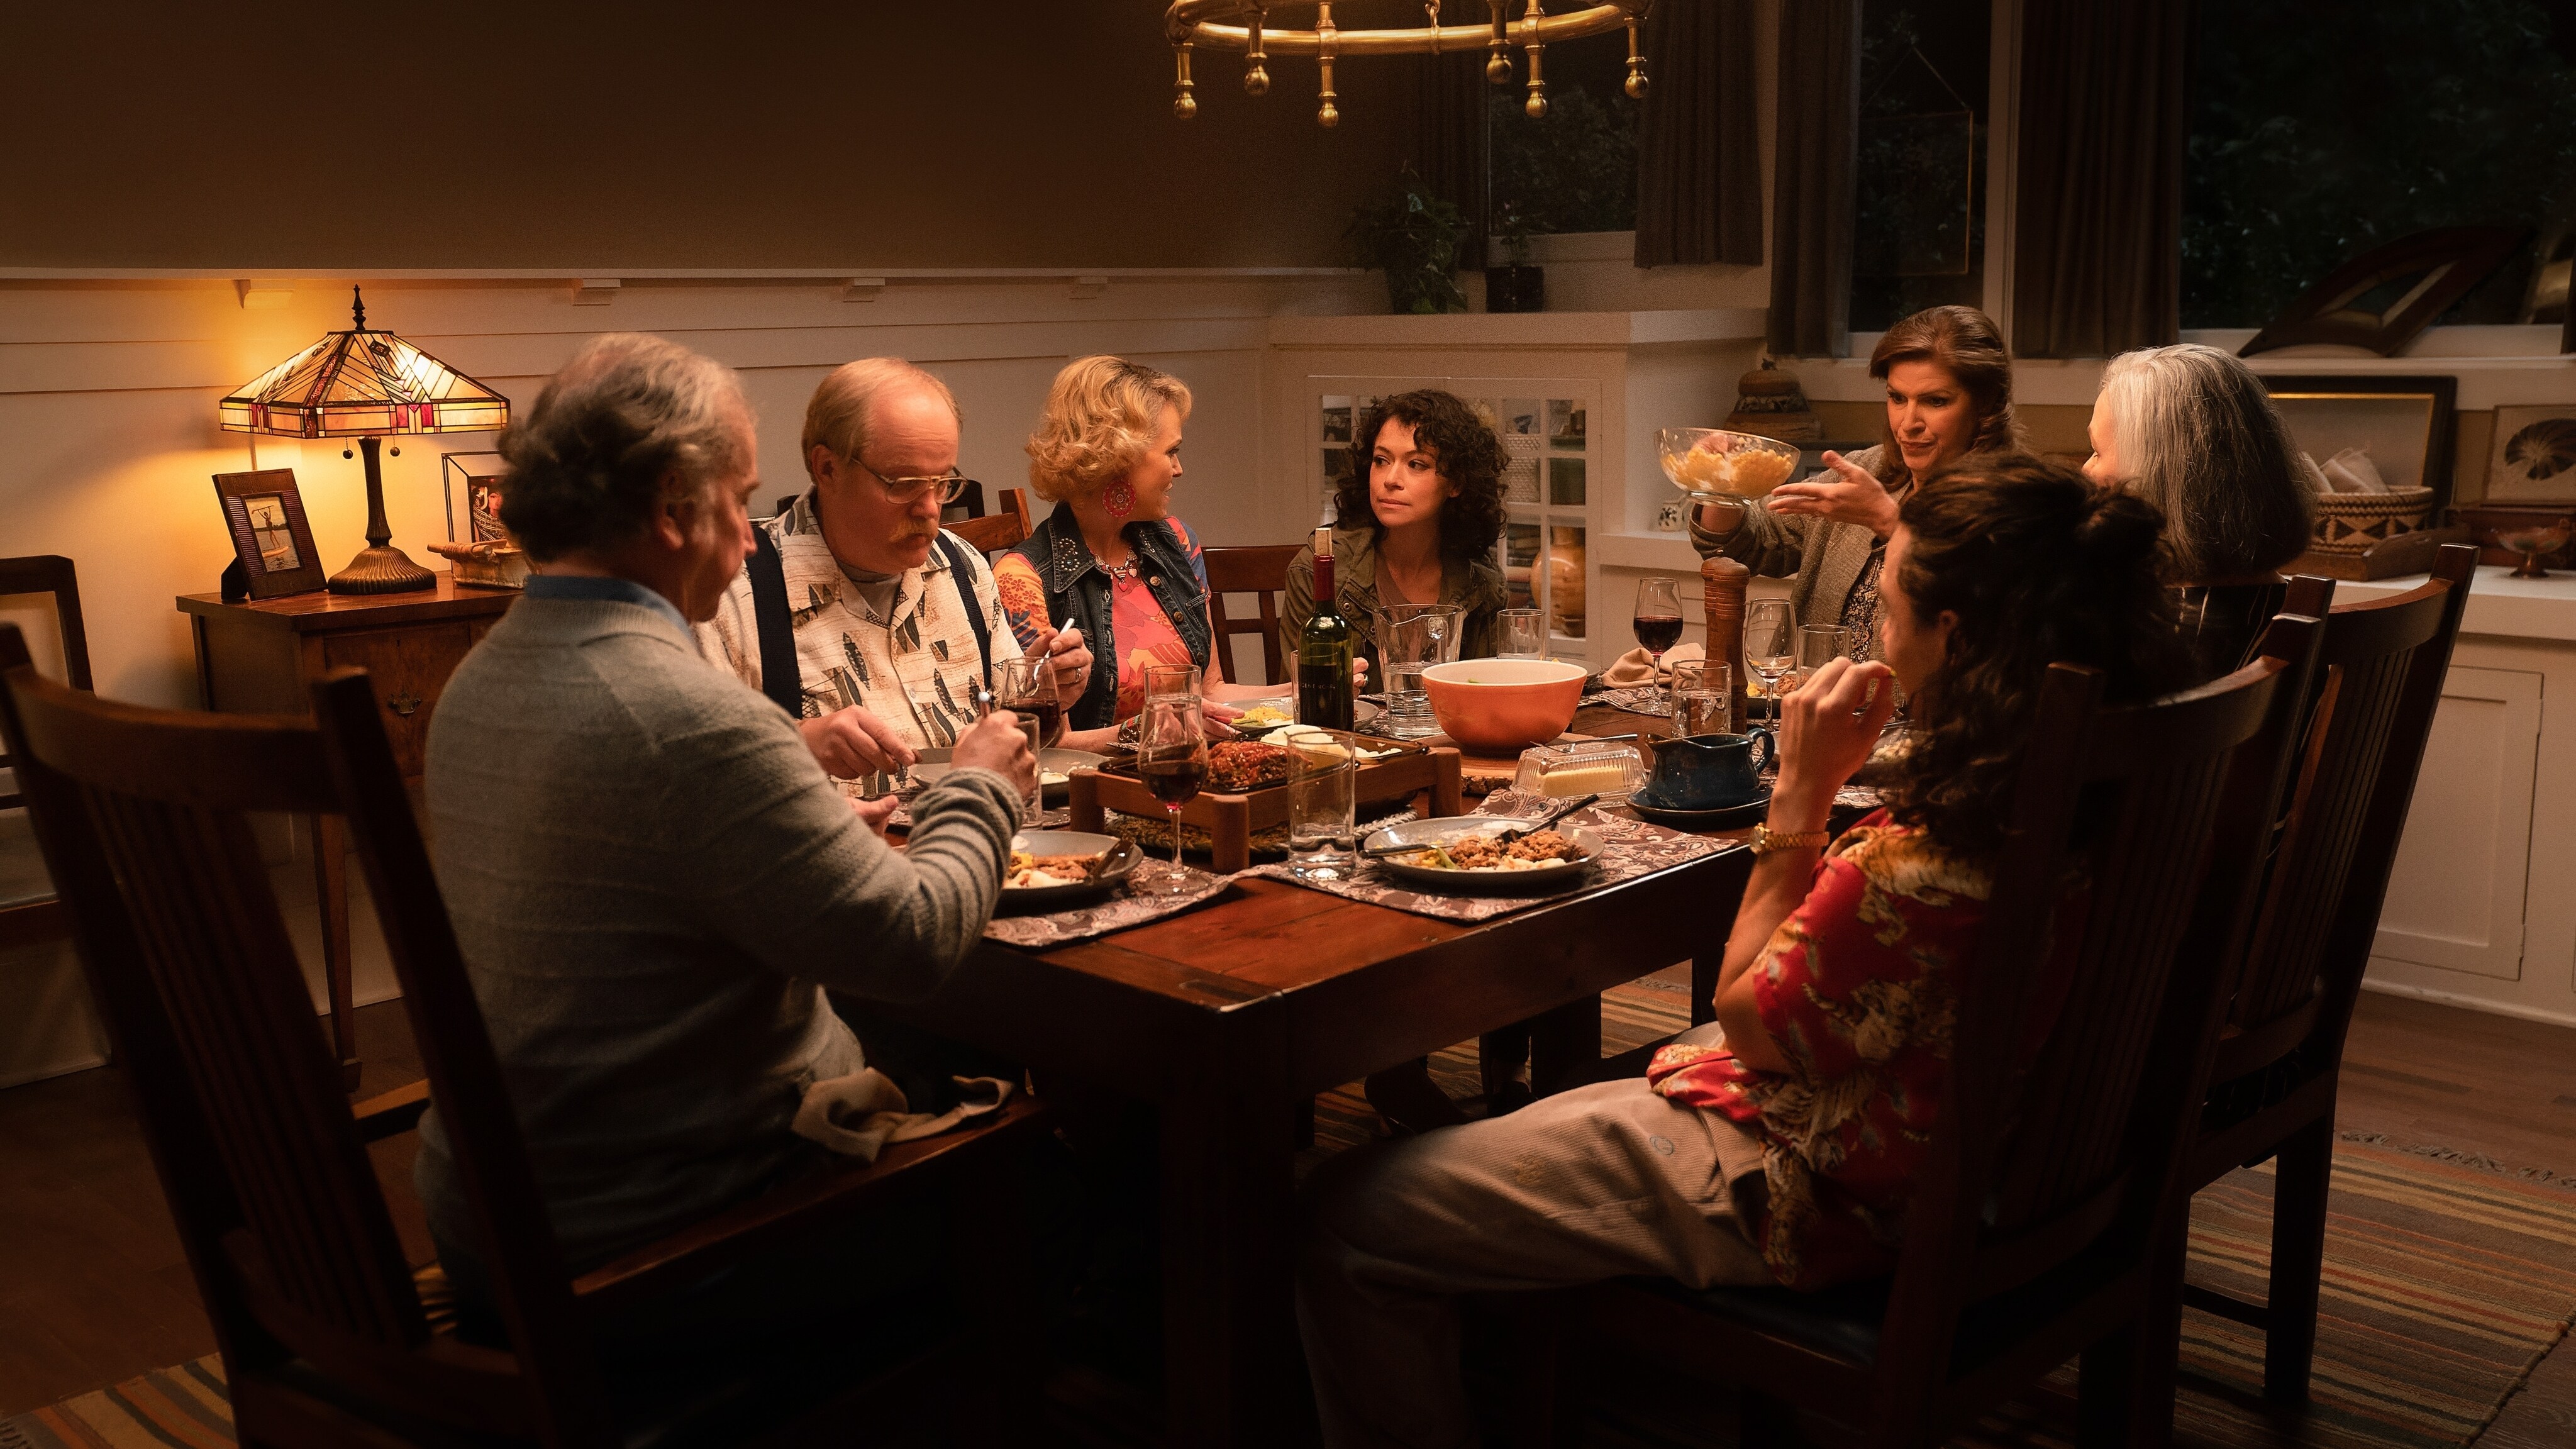 (L-R): Mark Linn-Baker as Morris Walters, Michael H. Cole as Uncle Tucker, Candice Rose as Melanie, Tatiana Maslany as She-Hulk/Jennifer “Jen” Walters, Tess Malis Kincaid as Elaine Walters, Nicholas Cirillo as Cousin Ched, and Elizabeth Becka as Aunt Rebecca Walters in Marvel Studios' She-Hulk: Attorney At Law, exclusively on Disney+. Photo by Daniel McFadden. © 2022 MARVEL.